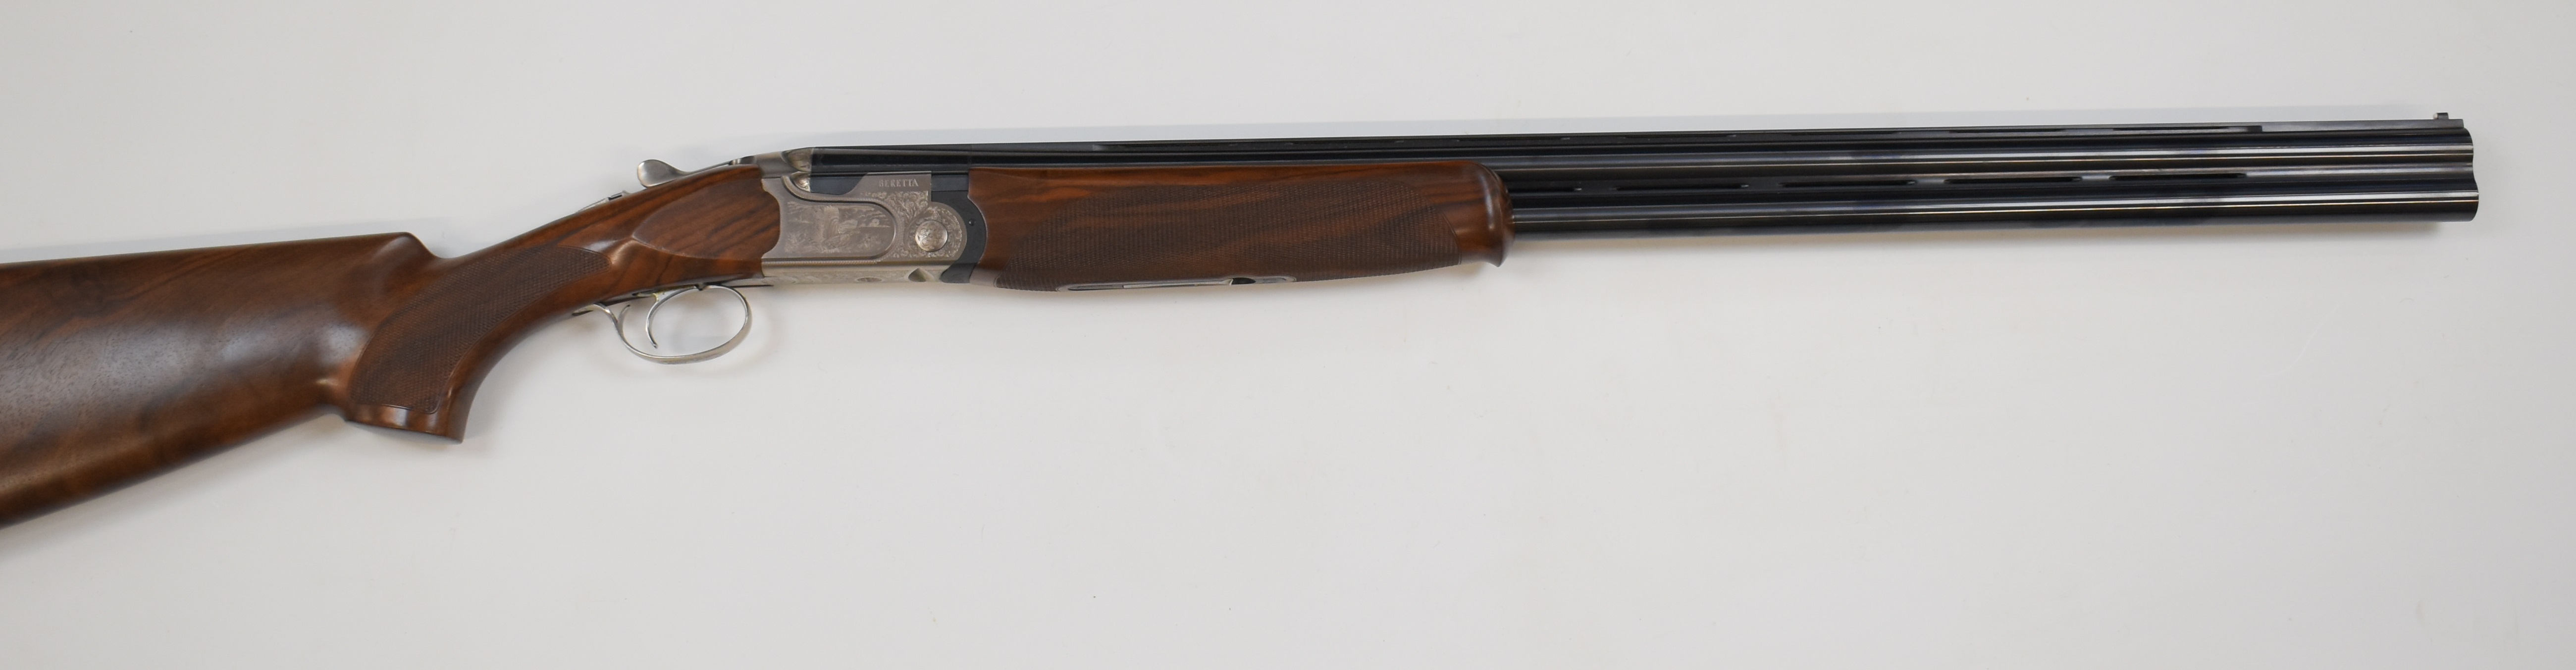 Beretta 690 III Sporting 12 bore over and under ejector shotgun with named and engraved scenes of - Image 2 of 15